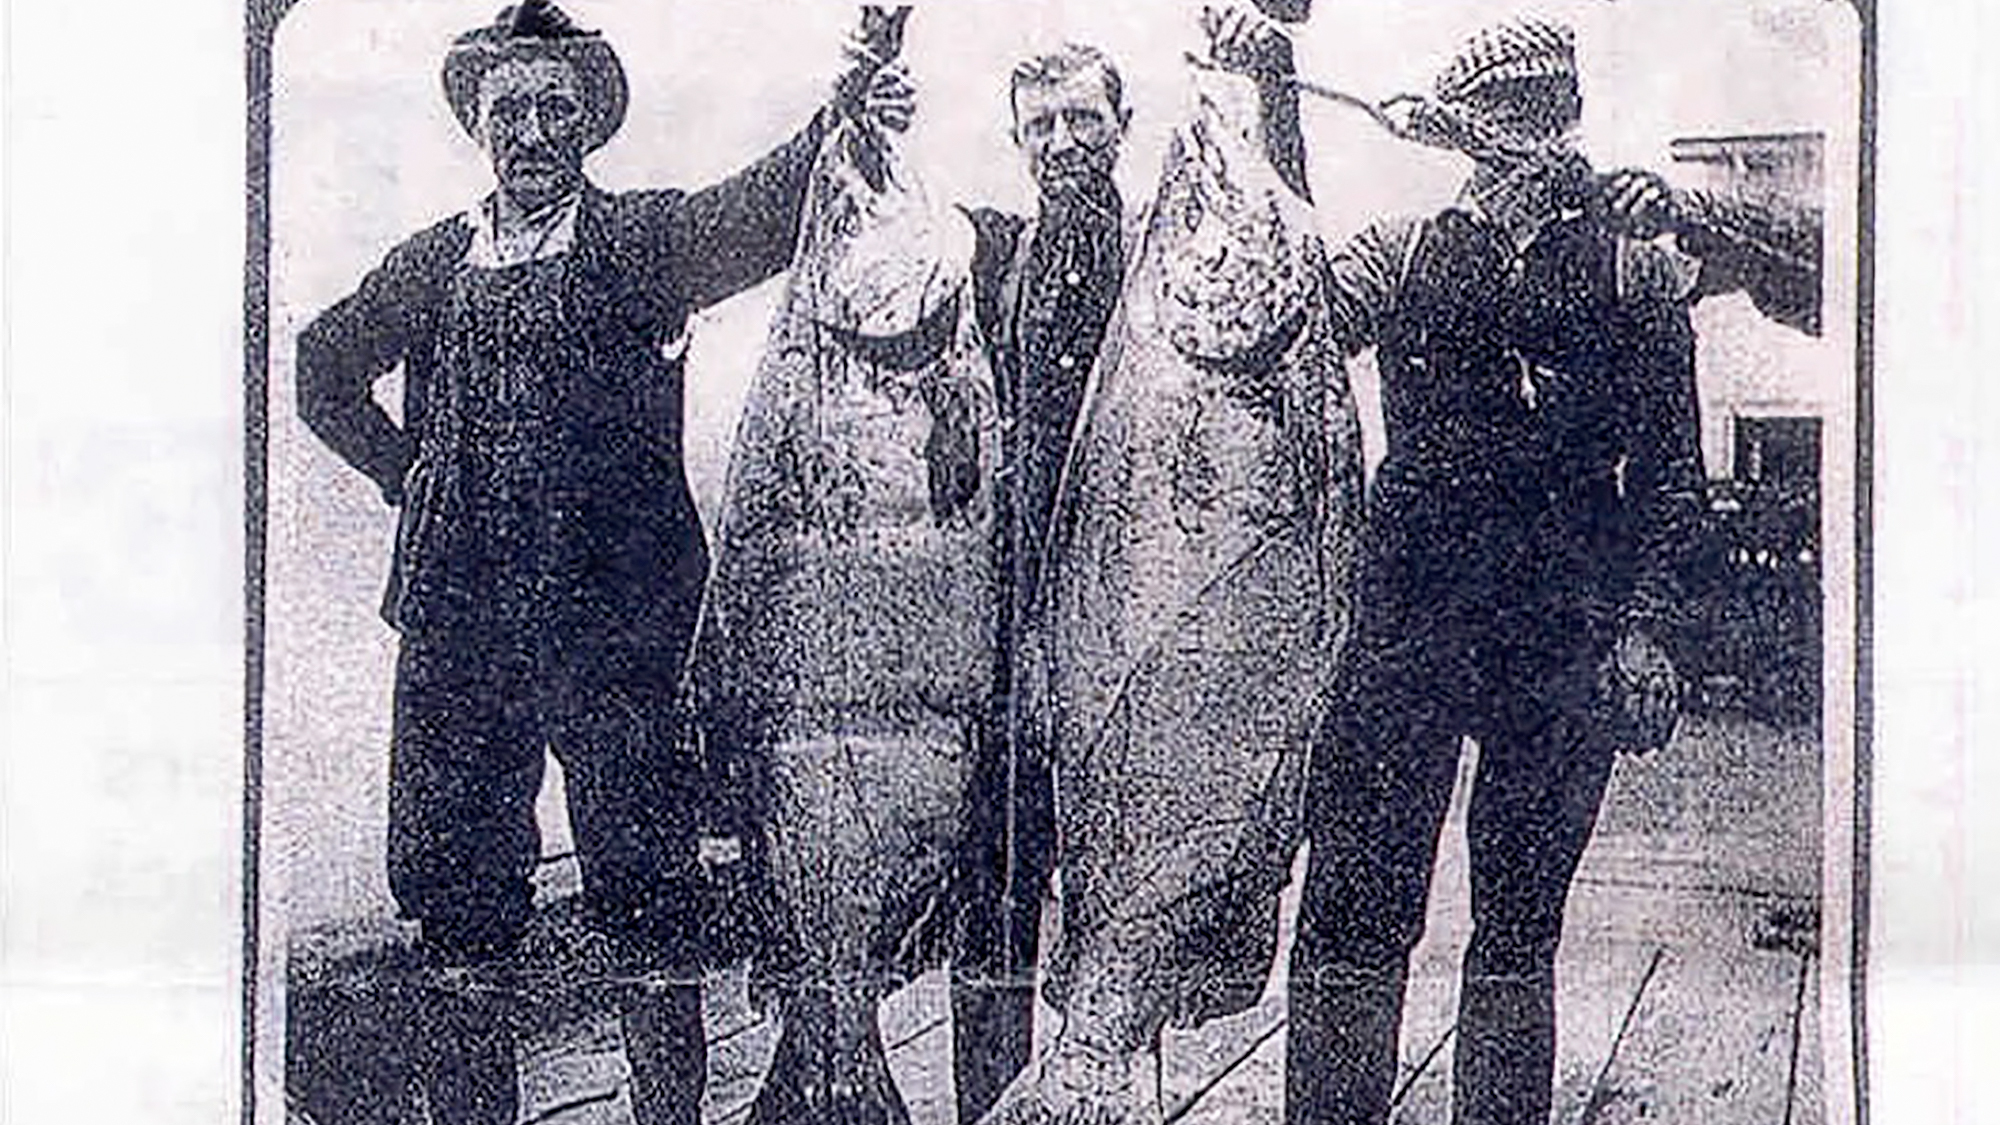 A photo taken in Astoria, Ore., circa 1910. It was stated that the chinook on the left weighed 116 pounds and the one on the right weighed 121 pounds.